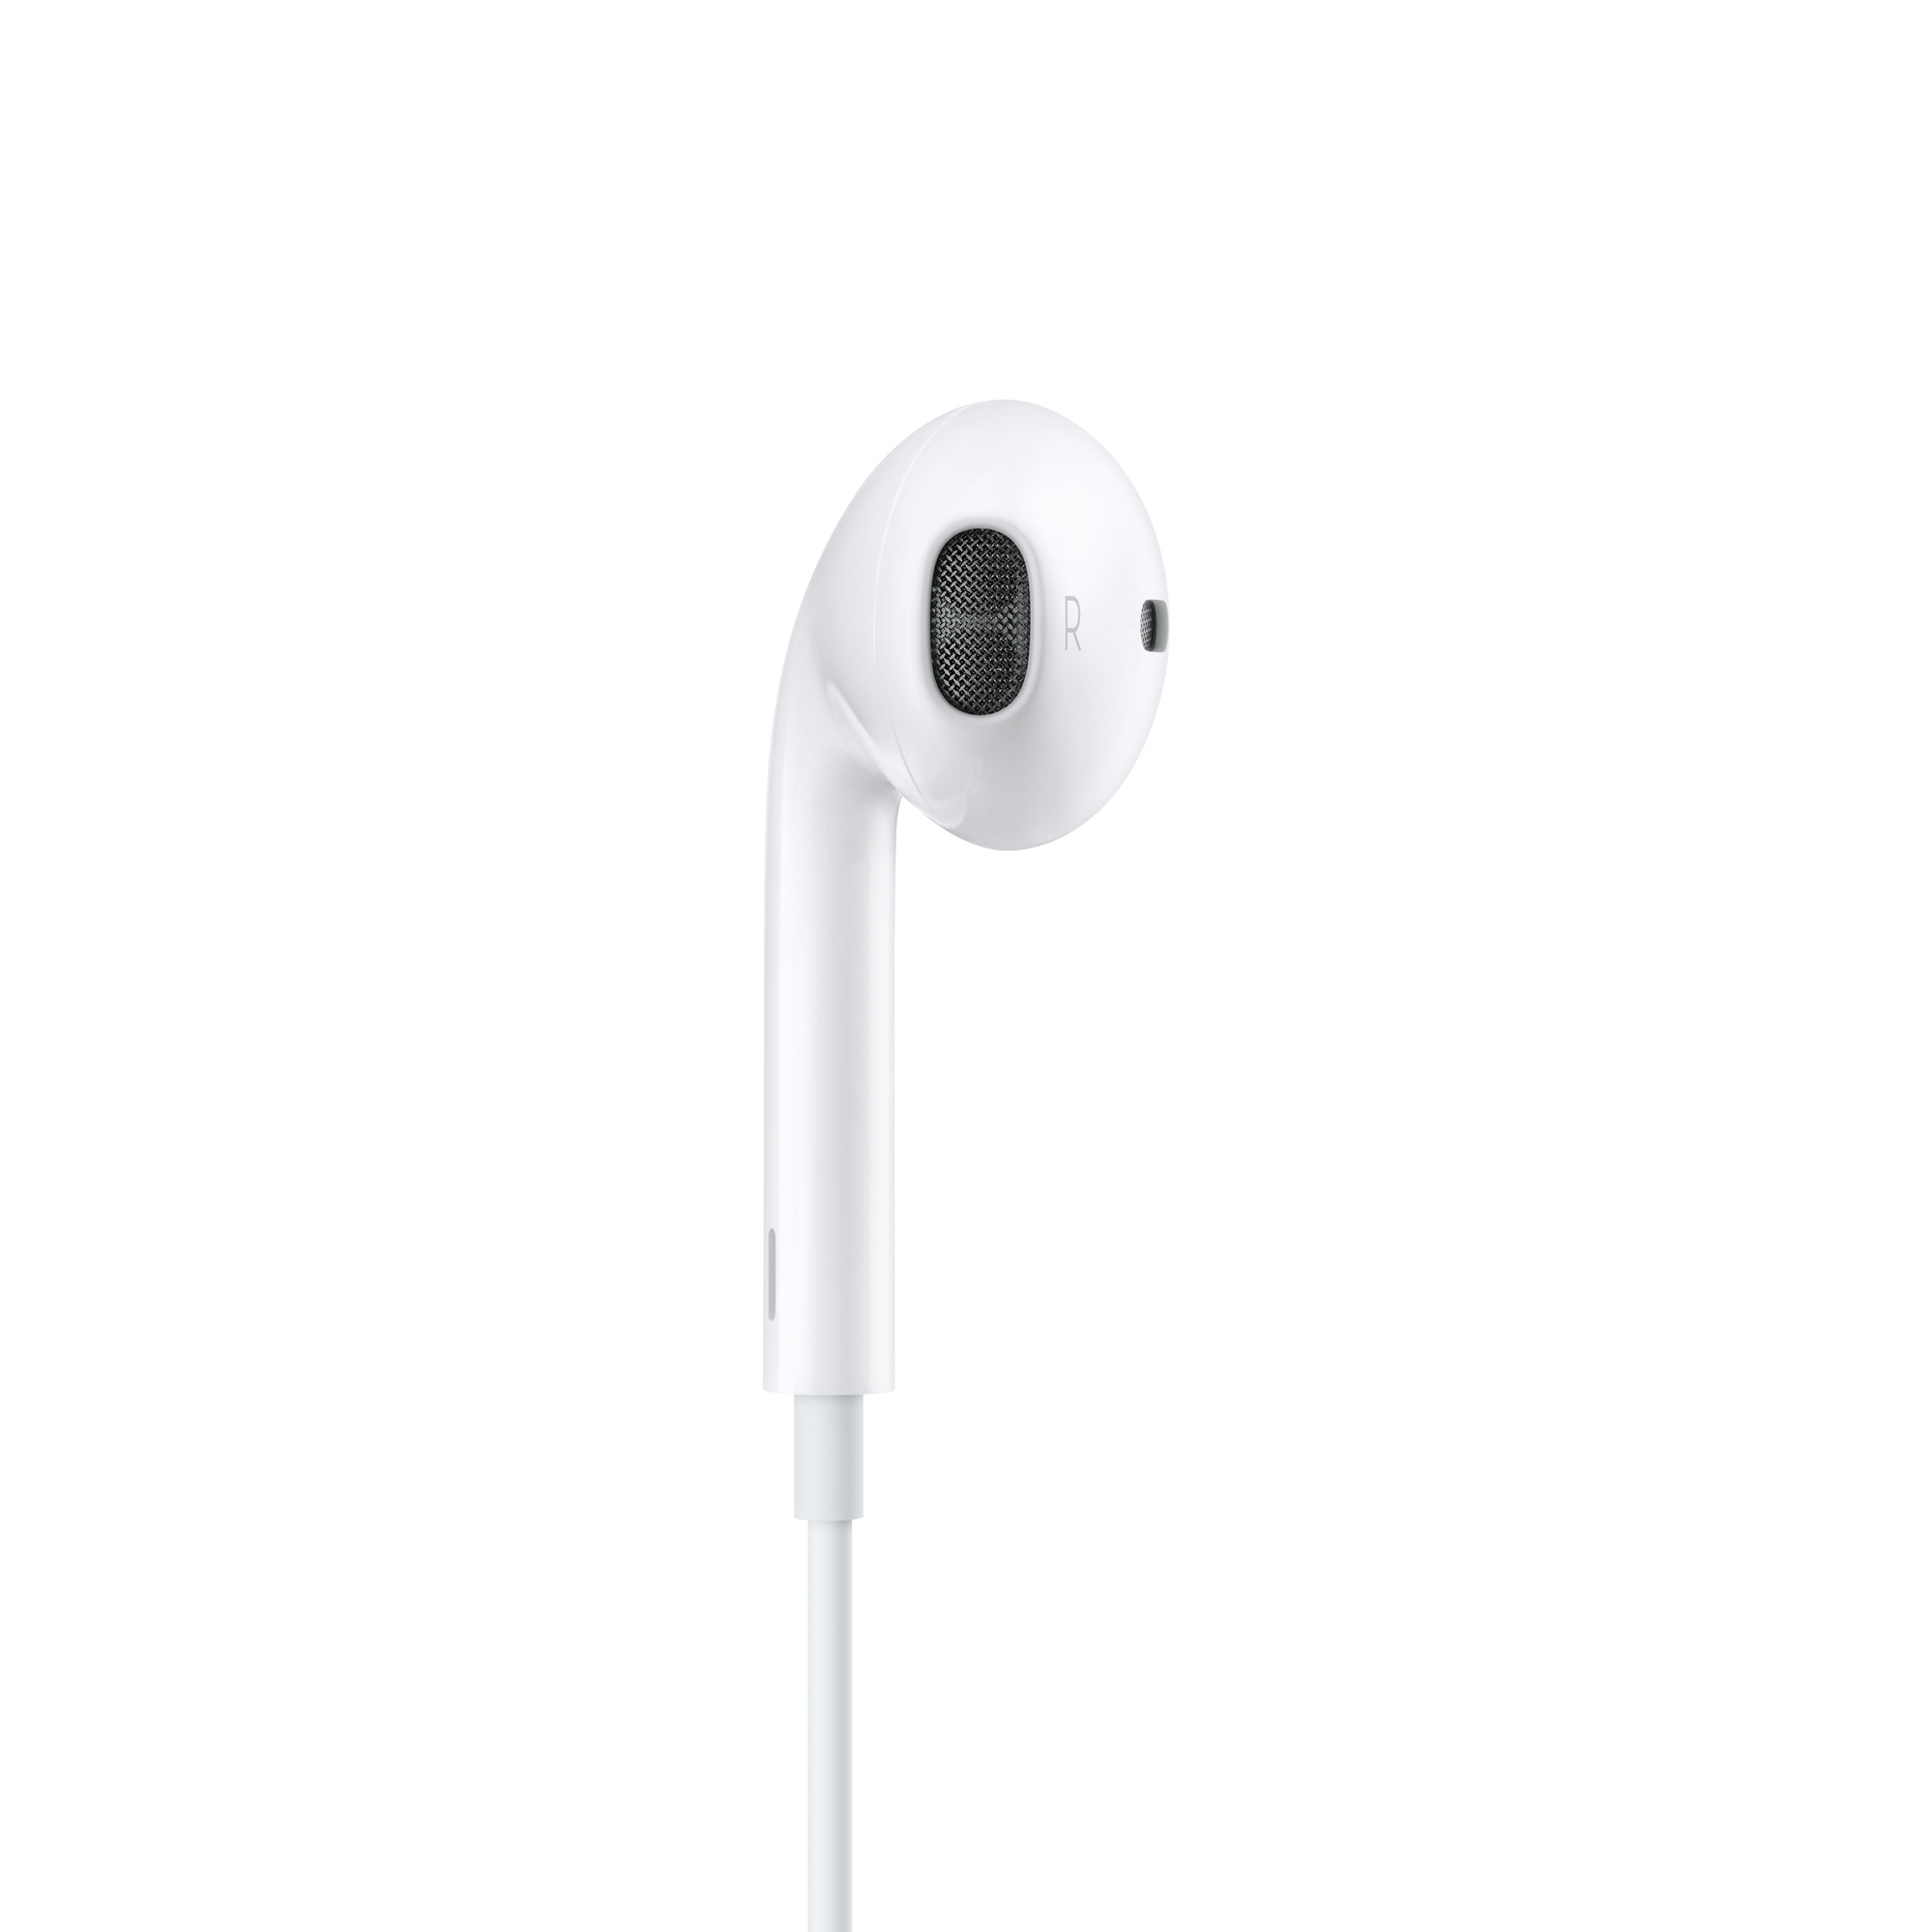 Airpods with Lightning Connector